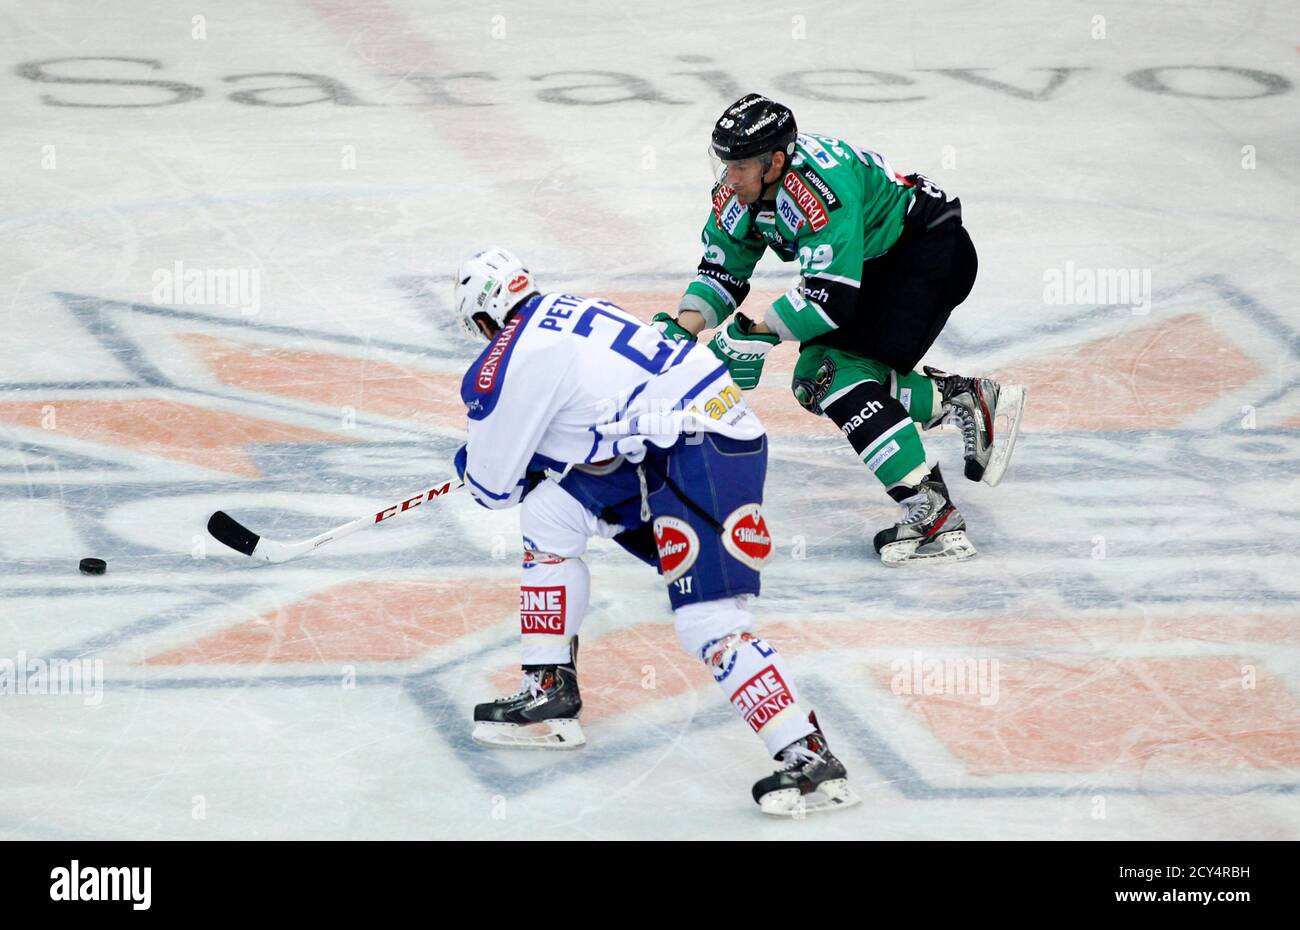 Telemach Olimpija player Anze Ropret (R) challenges VSV Villach's Benjamin Petrik during their EBEL league in Sarajevo January 10, 2014. Austria's Ice Hockey league, known as Erste Bank Eishockey Liga (EBEL), groups hockey teams from Austria, Slovenia, Hungary, the Czech Republic and Italy. The league will have its first match in Sarajevo on January 10 to mark the 30th anniversary of the 14th Winter Olympic Games hosted by the Bosnian capital. REUTERS/Dado Ruvic (BOSNIA AND HERZEGOVINA - Tags: SPORT ICE HOCKEY) Stock Photo